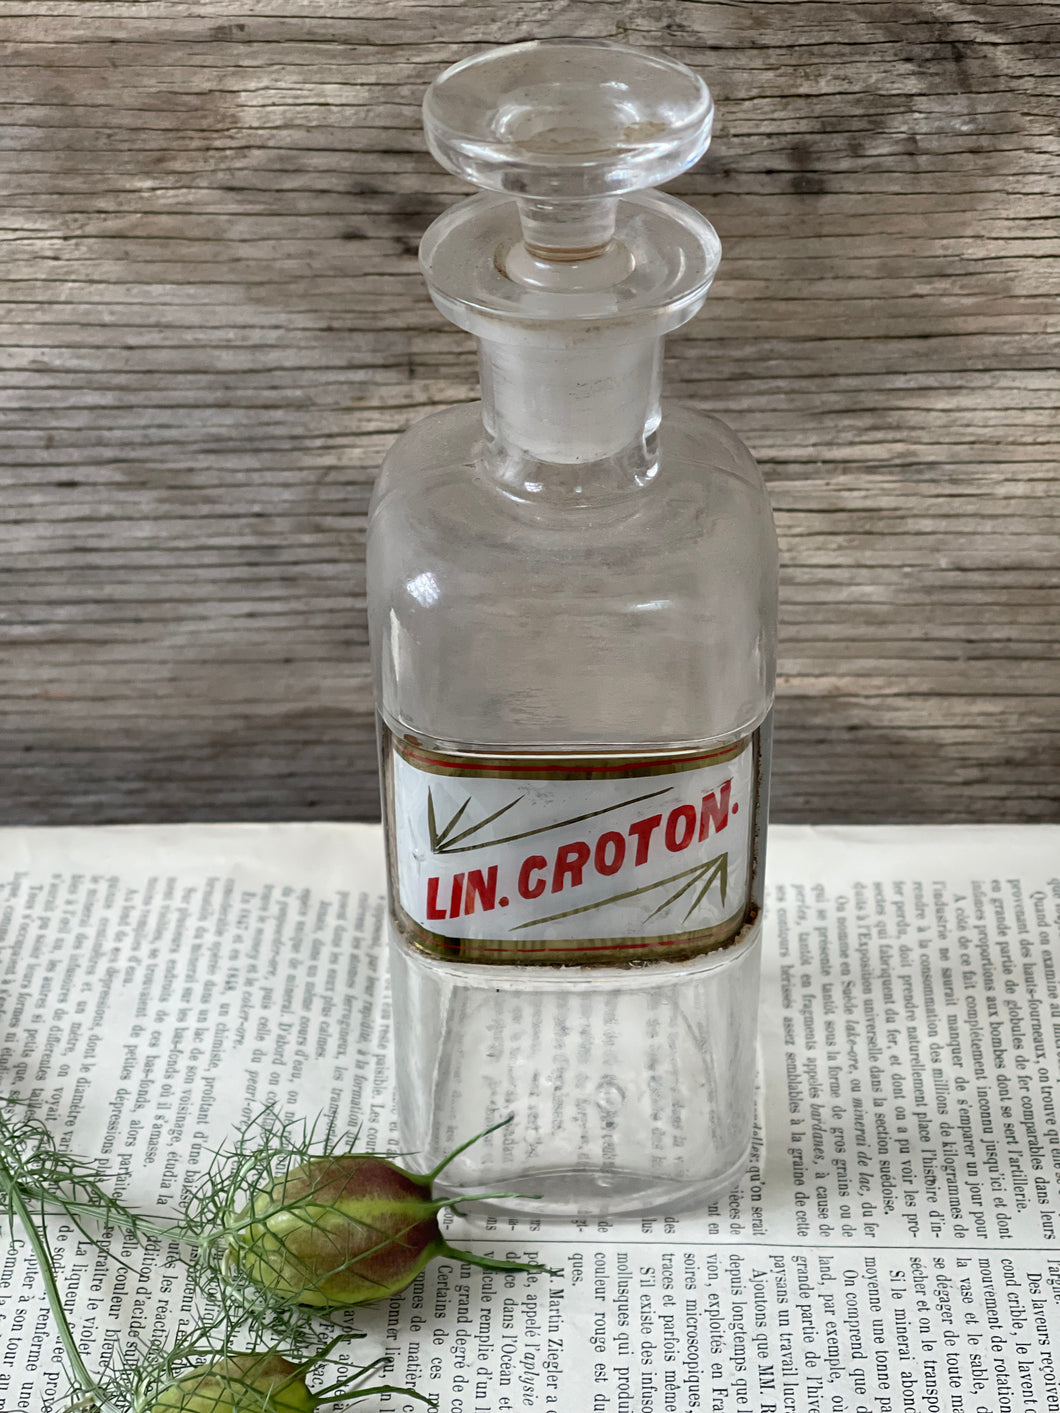 Antique Apothecary Bottle (Lin.Croton) With Lid.